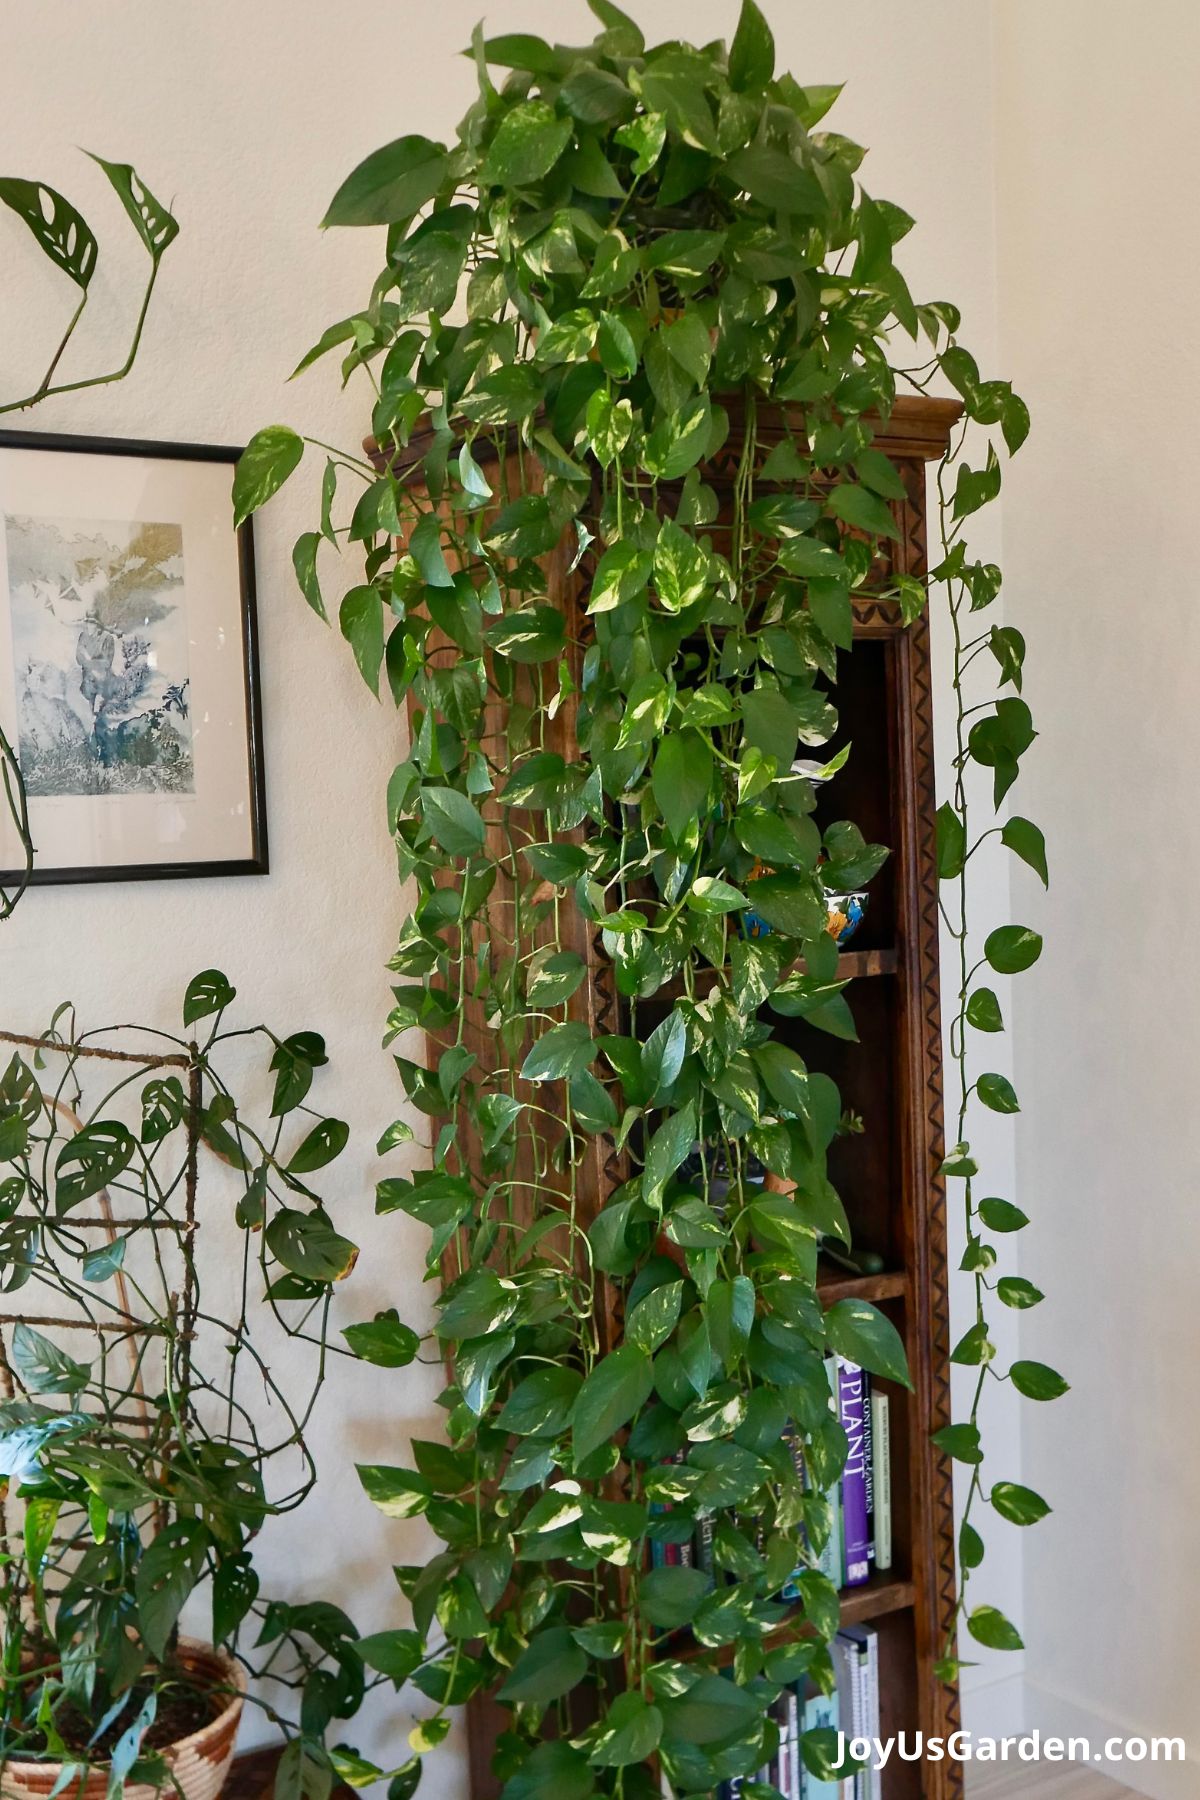 golden pothos sits atop a wooden bookshelf trails are shown hanging all the way down to the floor